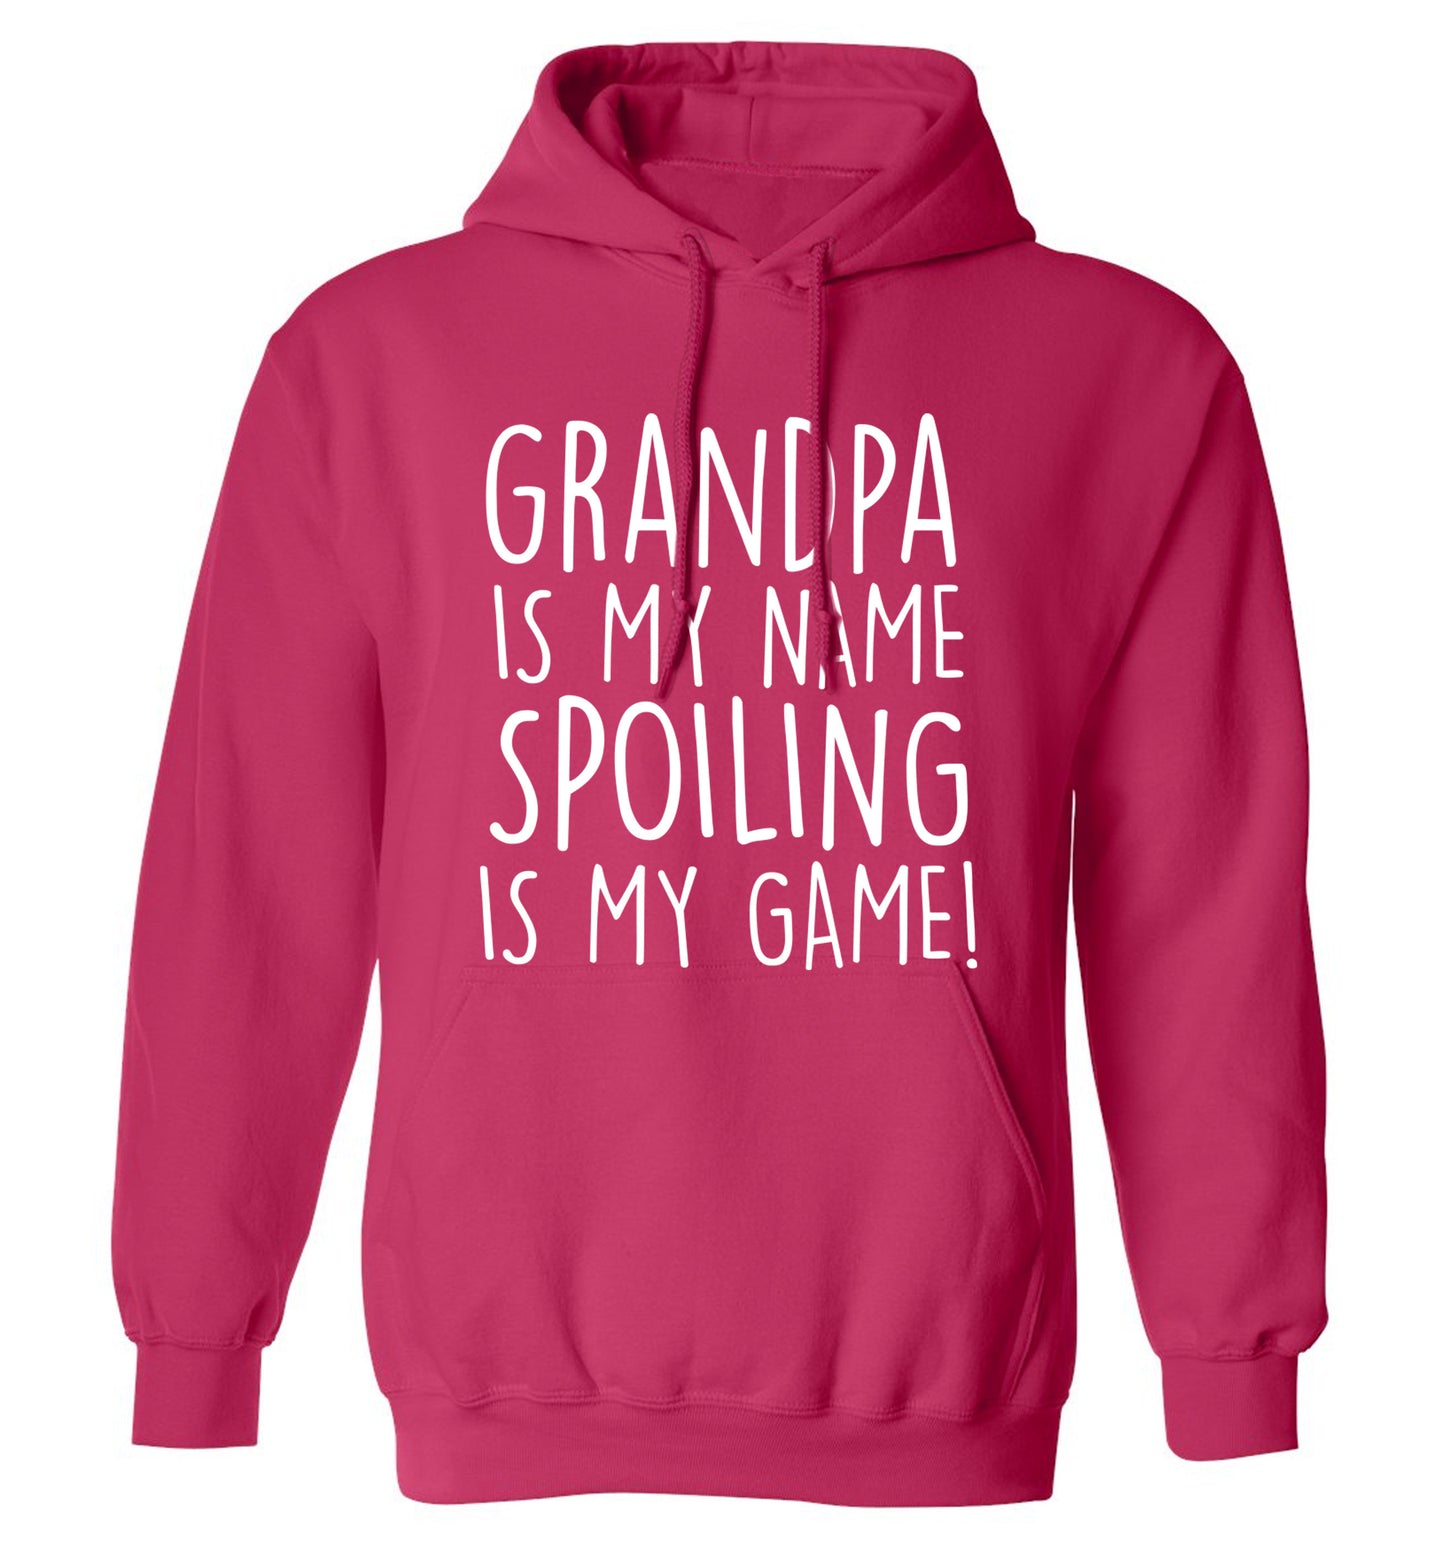 Grandpa is my name, spoiling is my game adults unisex pink hoodie 2XL